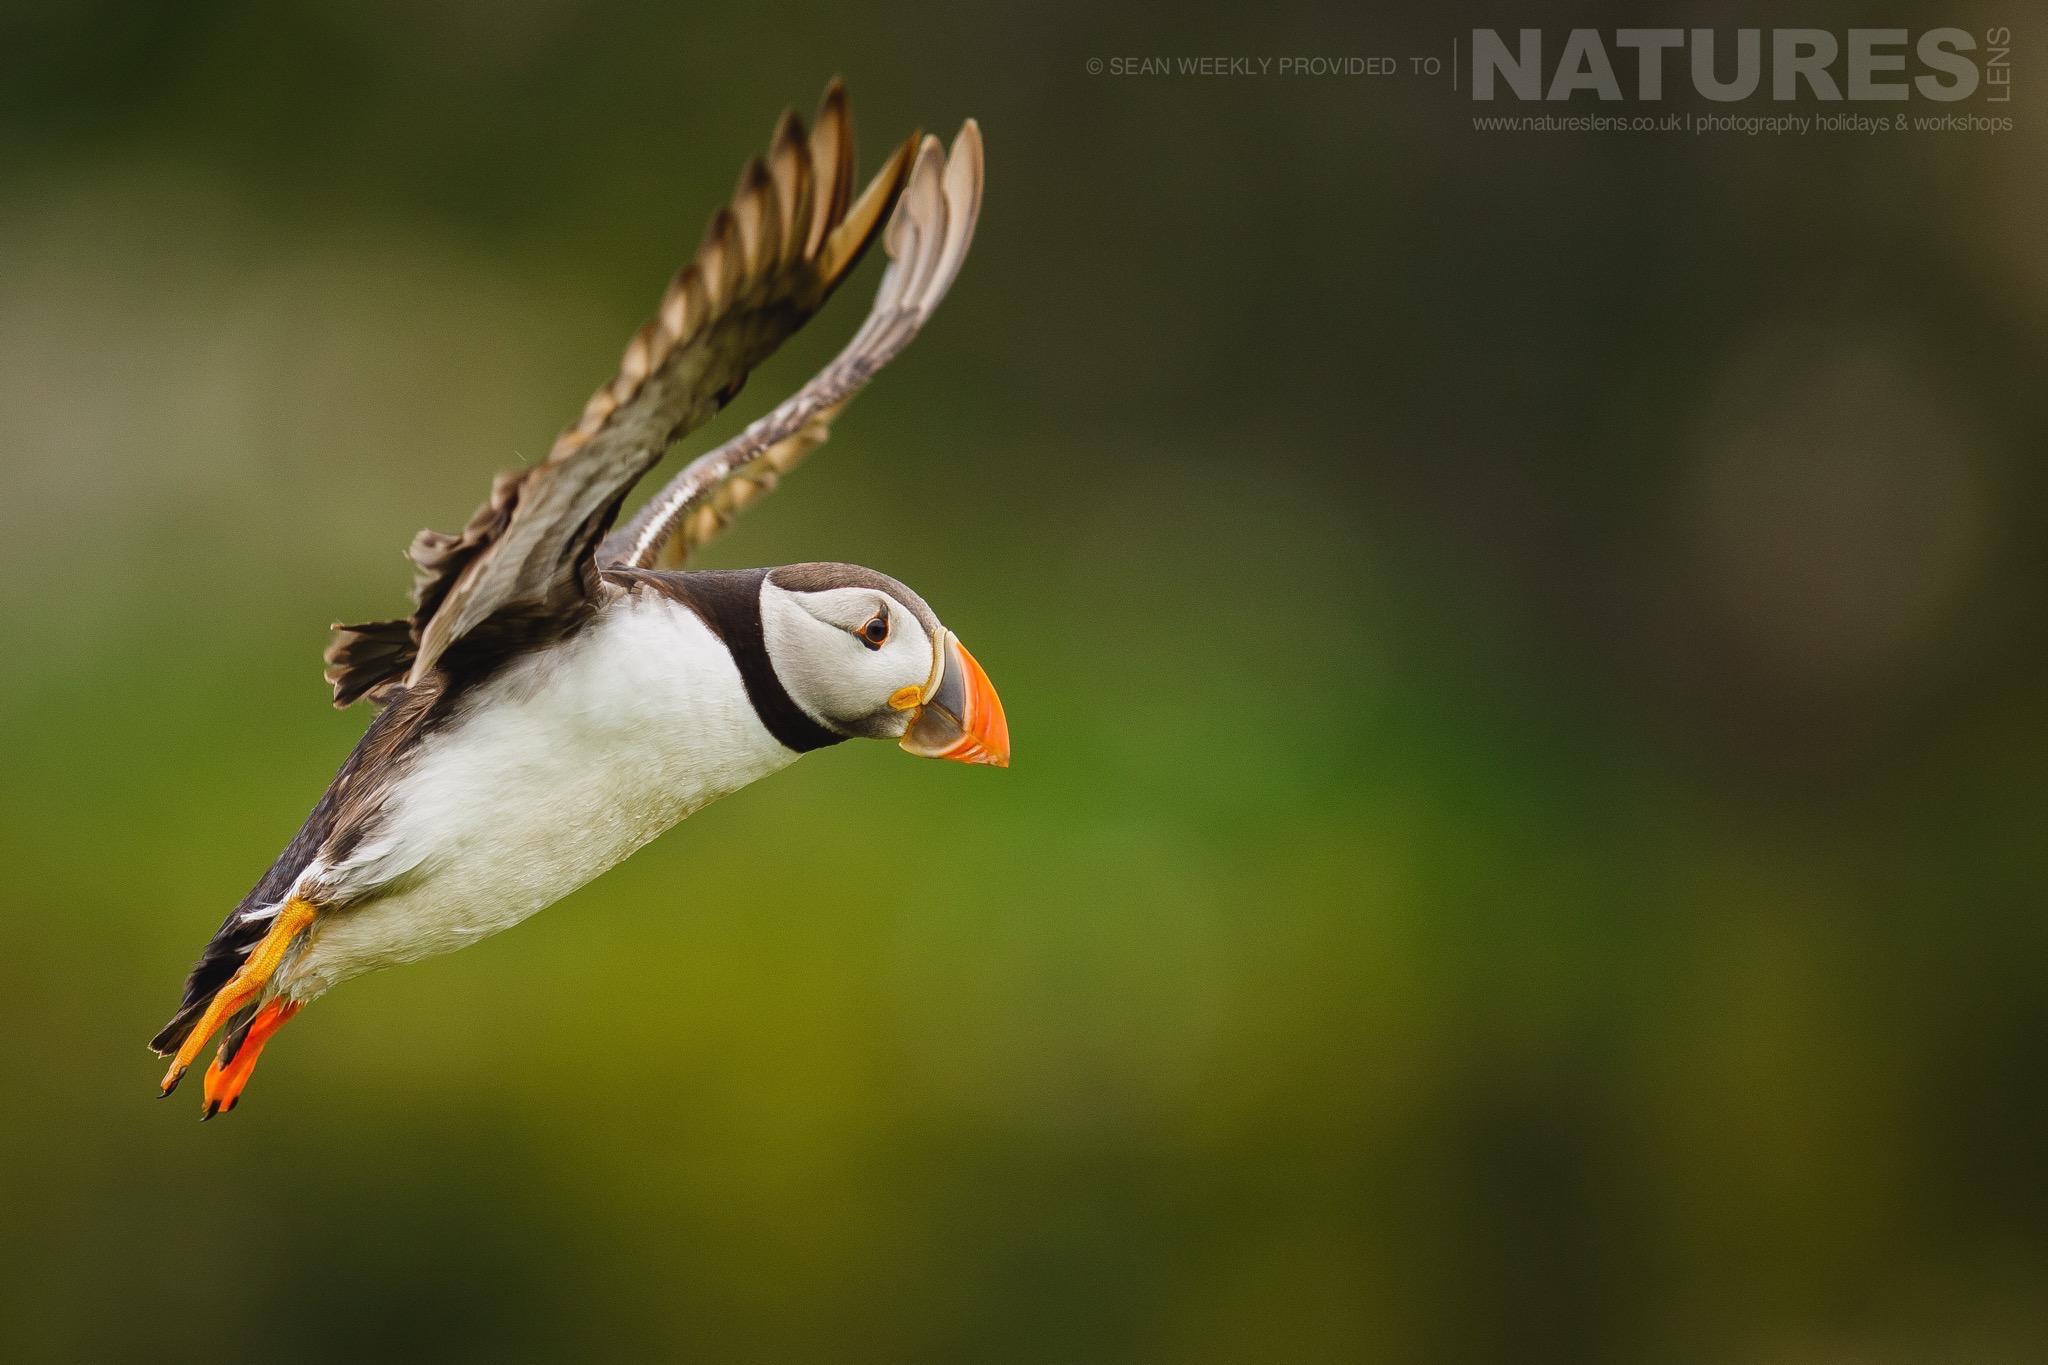 One of Skomers famous puffins comes in to land on The Wick typical of the kind of image that can be captured on the NaturesLens Puffins of Skomer Island Photography Holiday